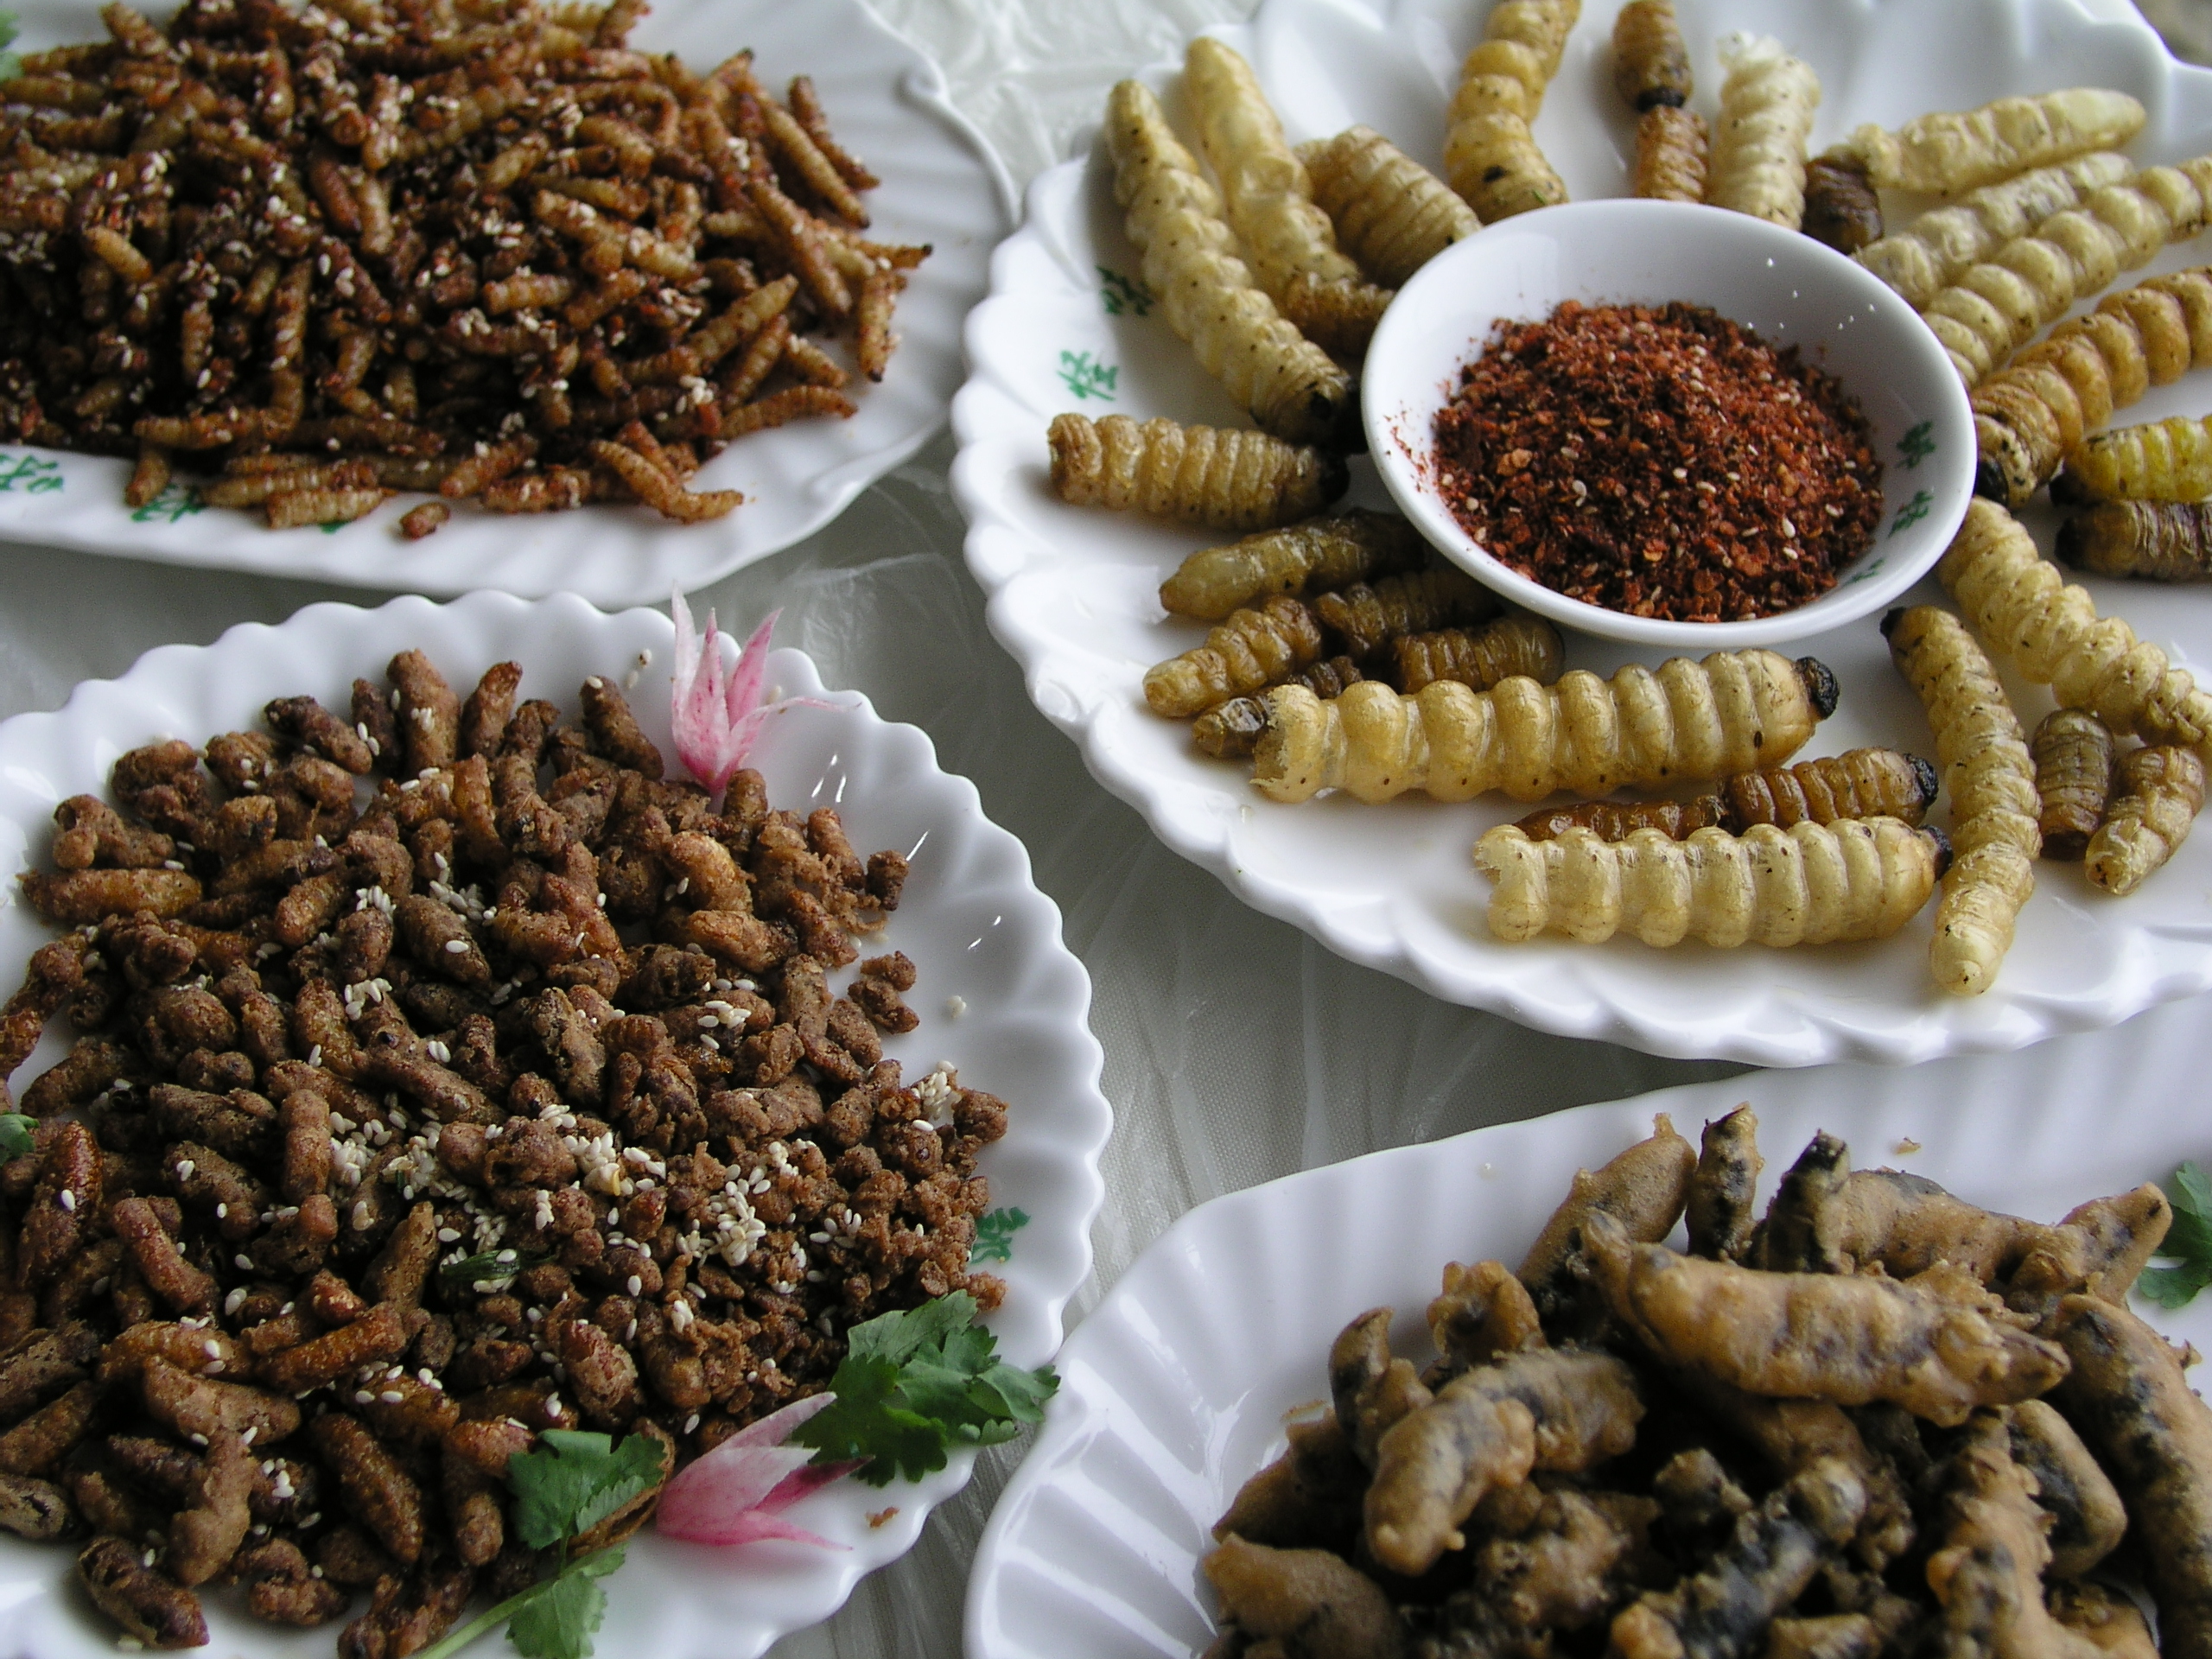 chinese people eating bugs